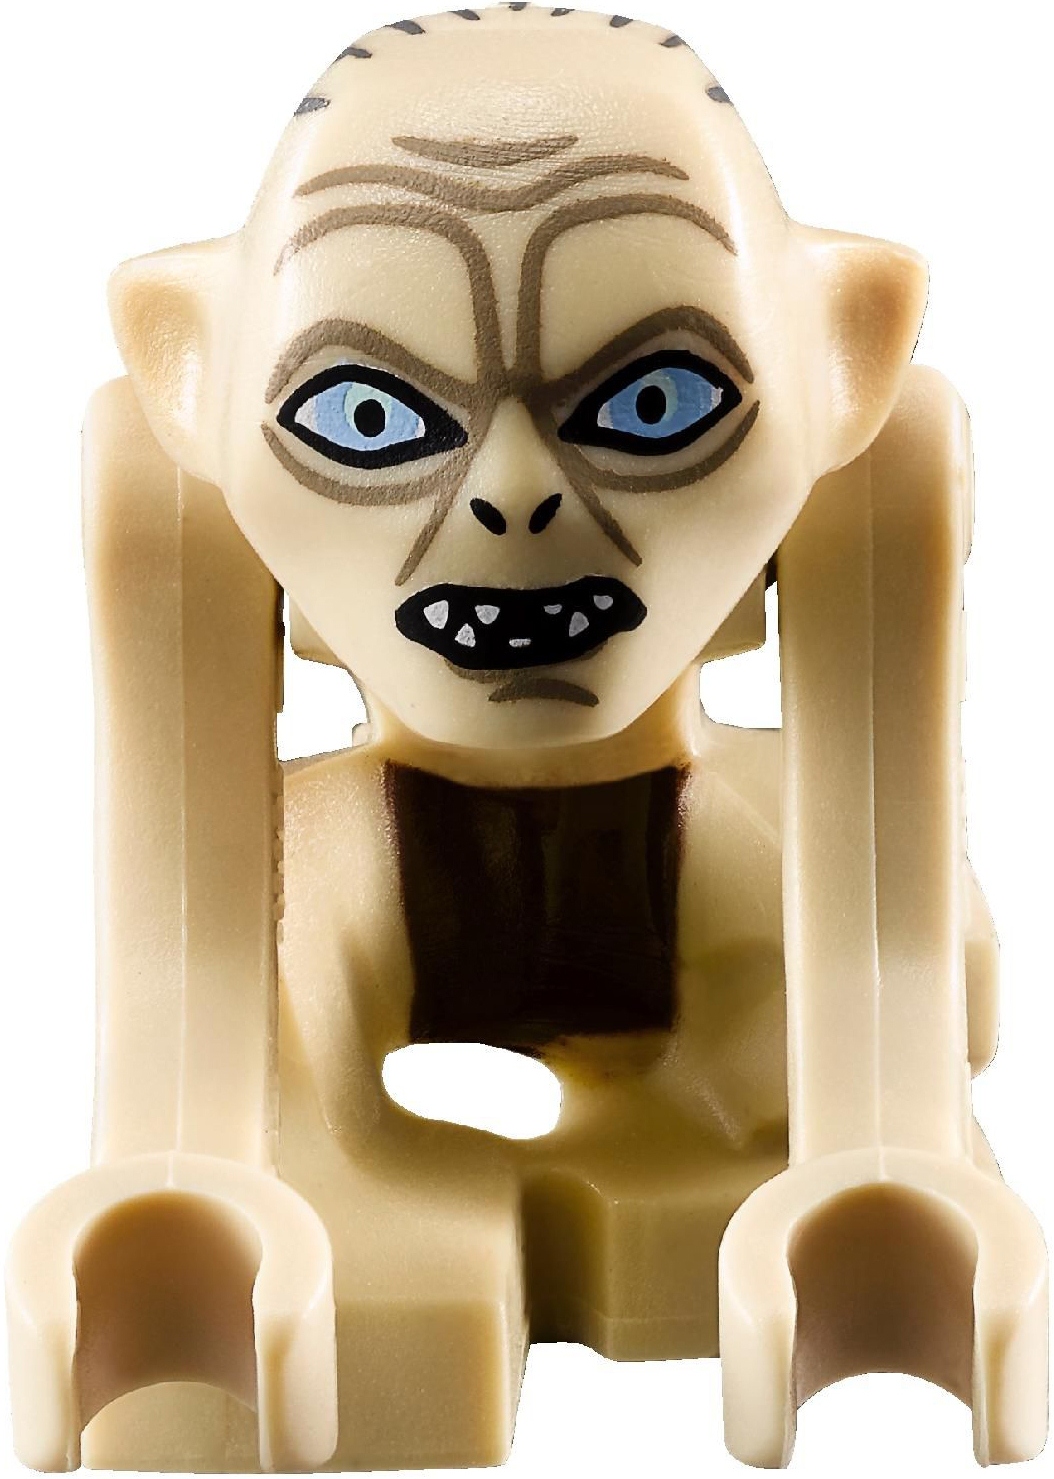 lord of the rings gollum lego